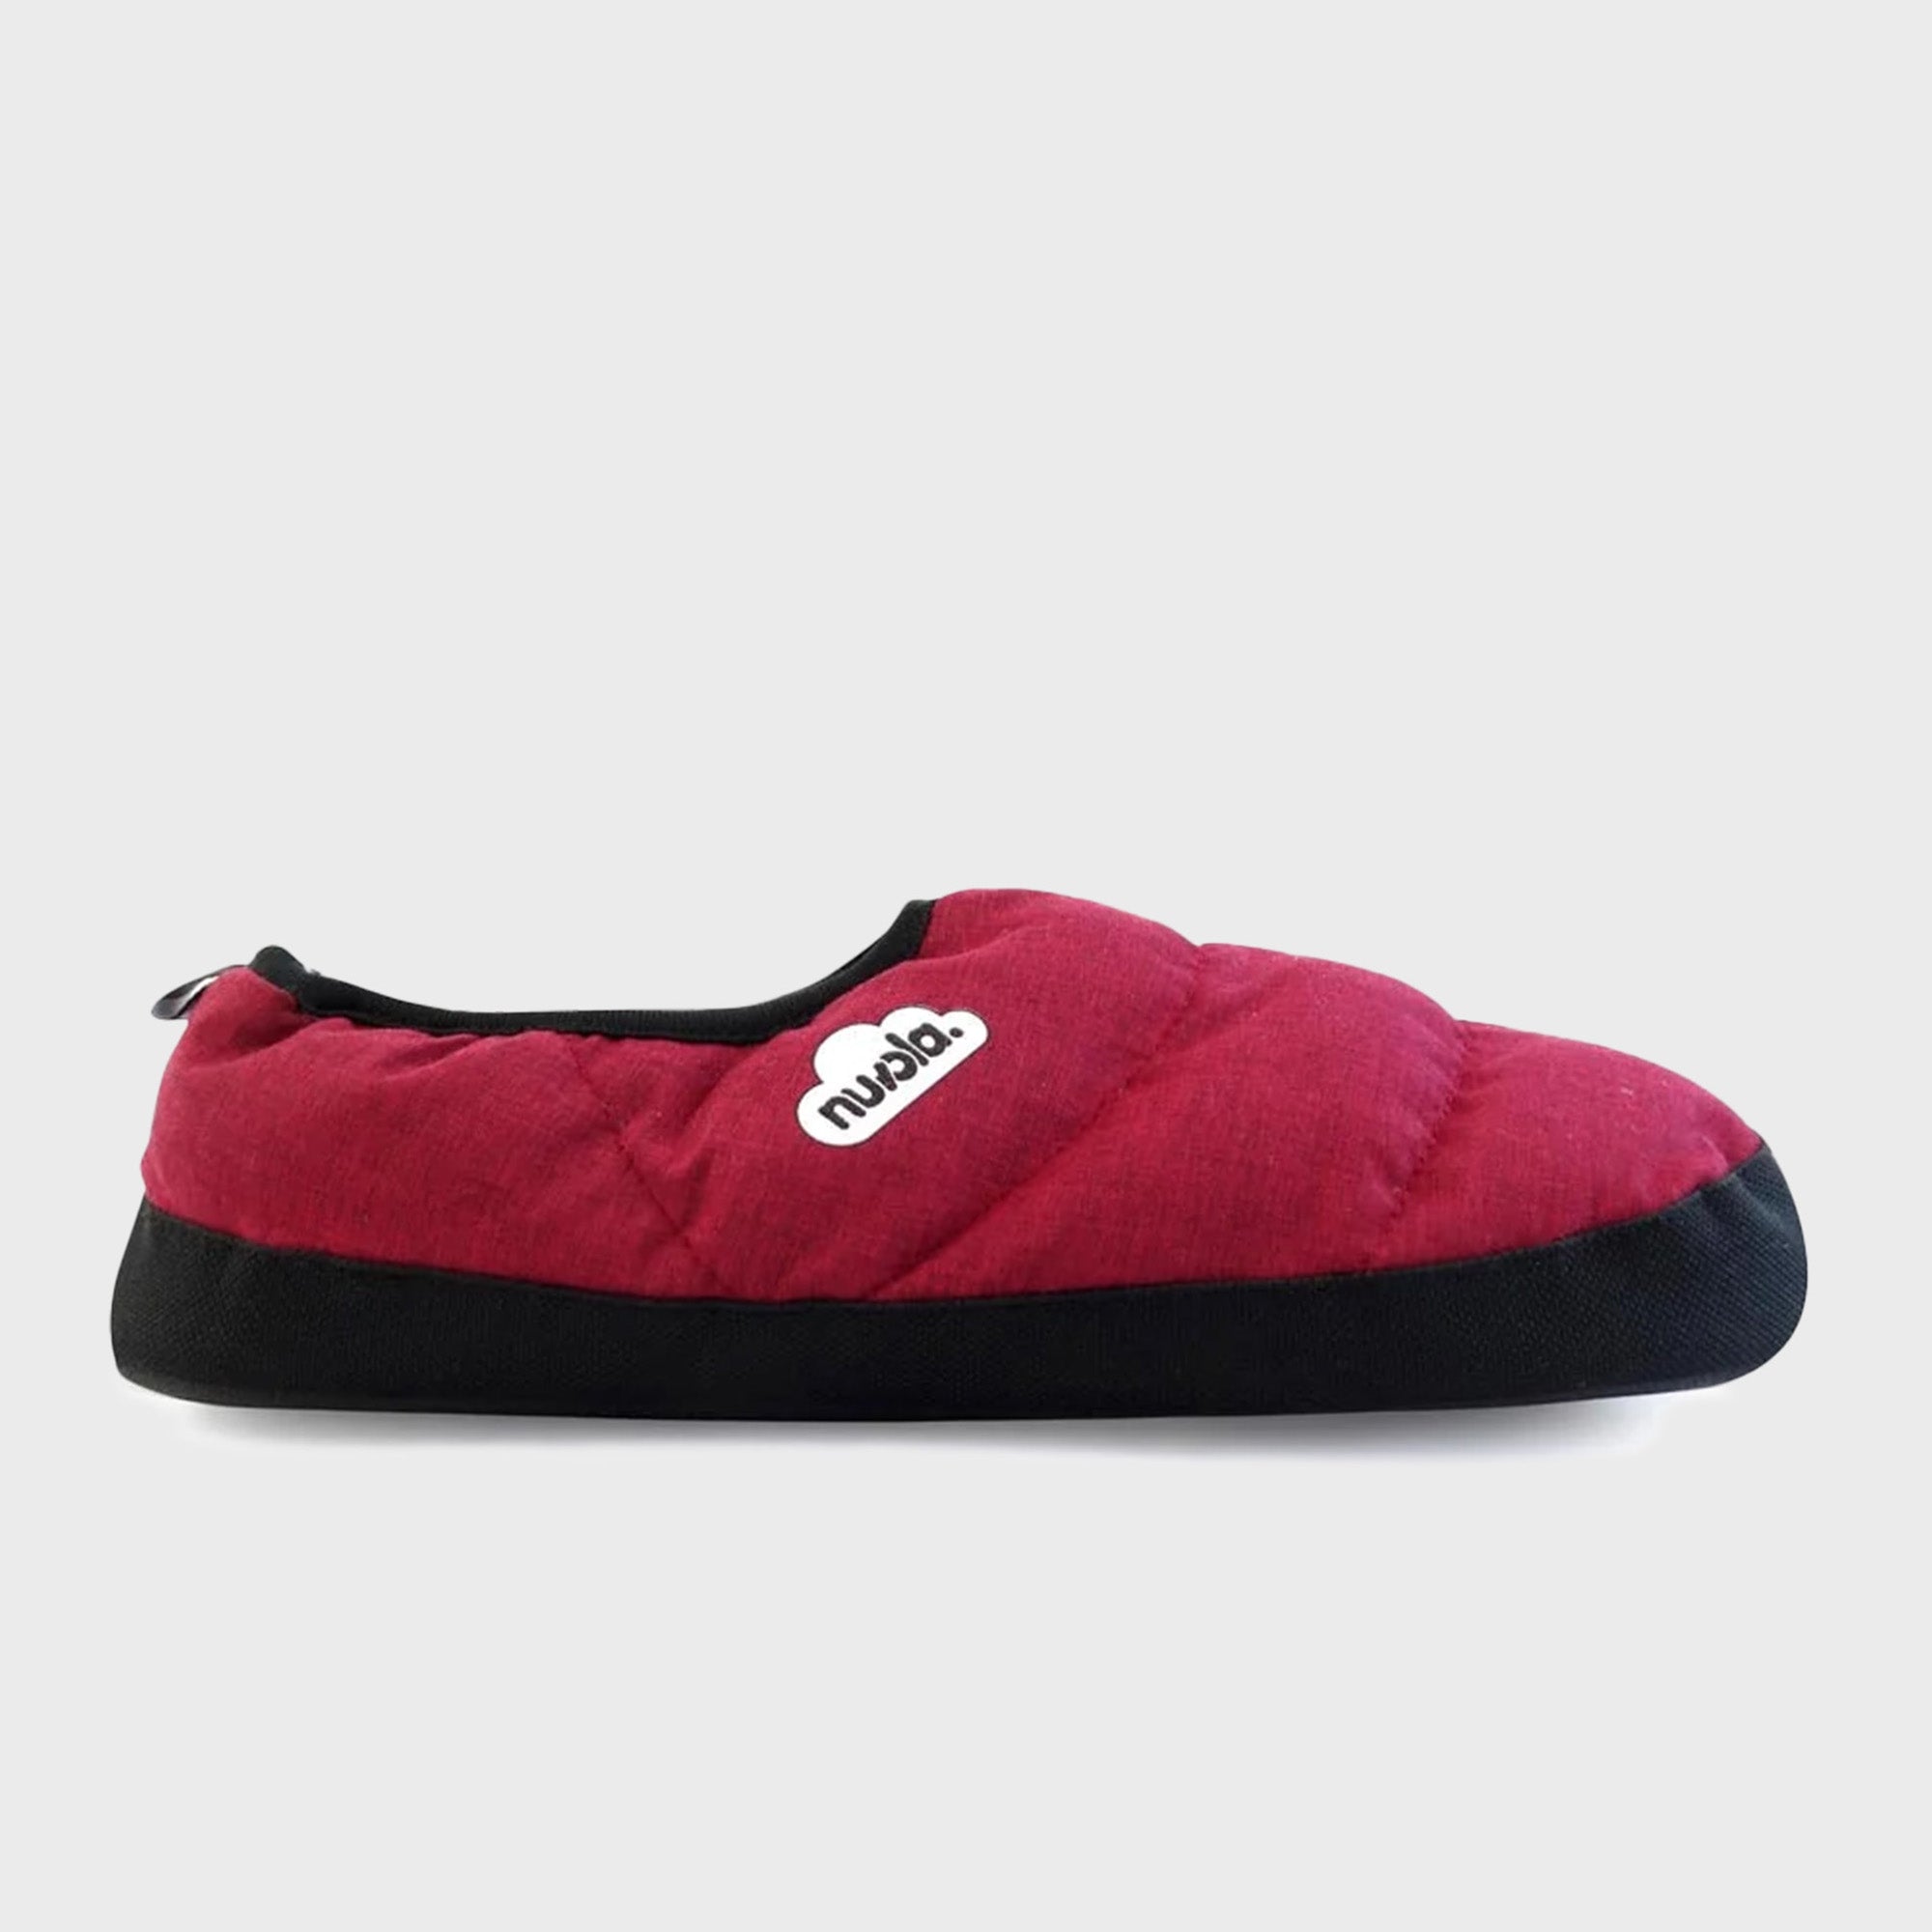 Nuvola Classic Marbled Chill Slippers in Garnet CNJASCHILL695 FROM EIGHTYWINGOLD - OFFICIAL BRAND PARTNER